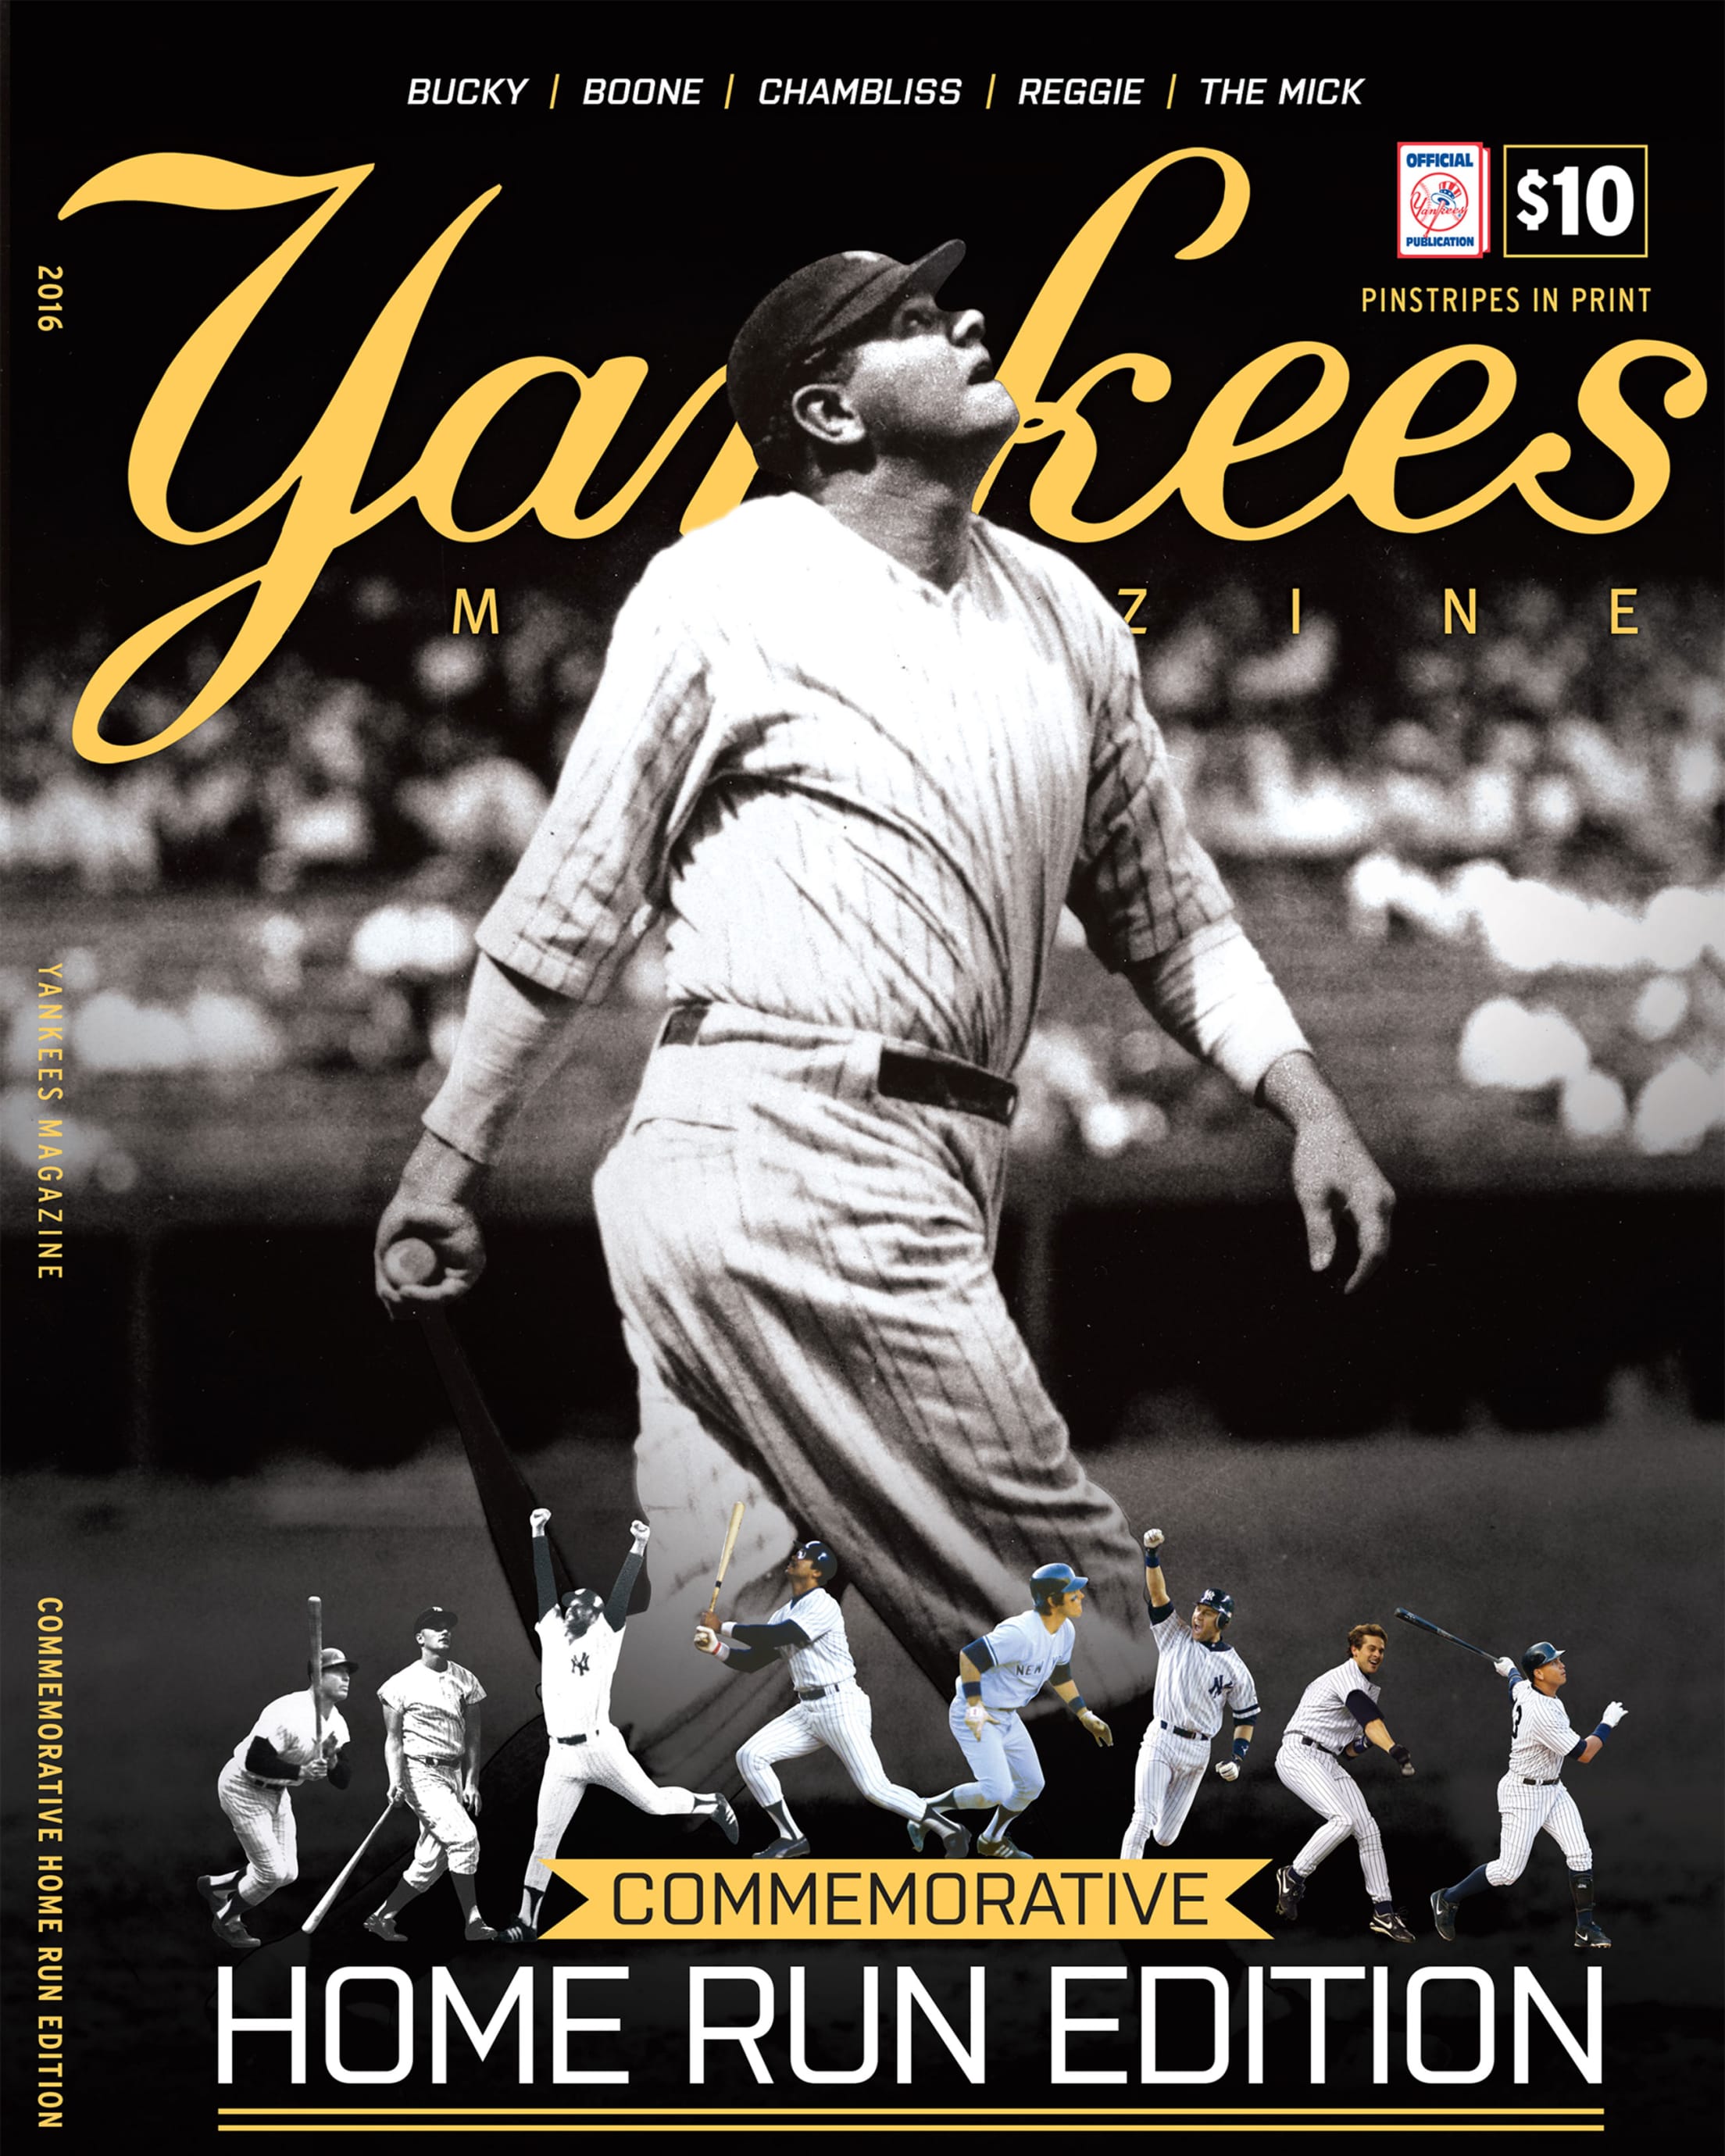 Yankees Magazine: Thank You For Your Service Time